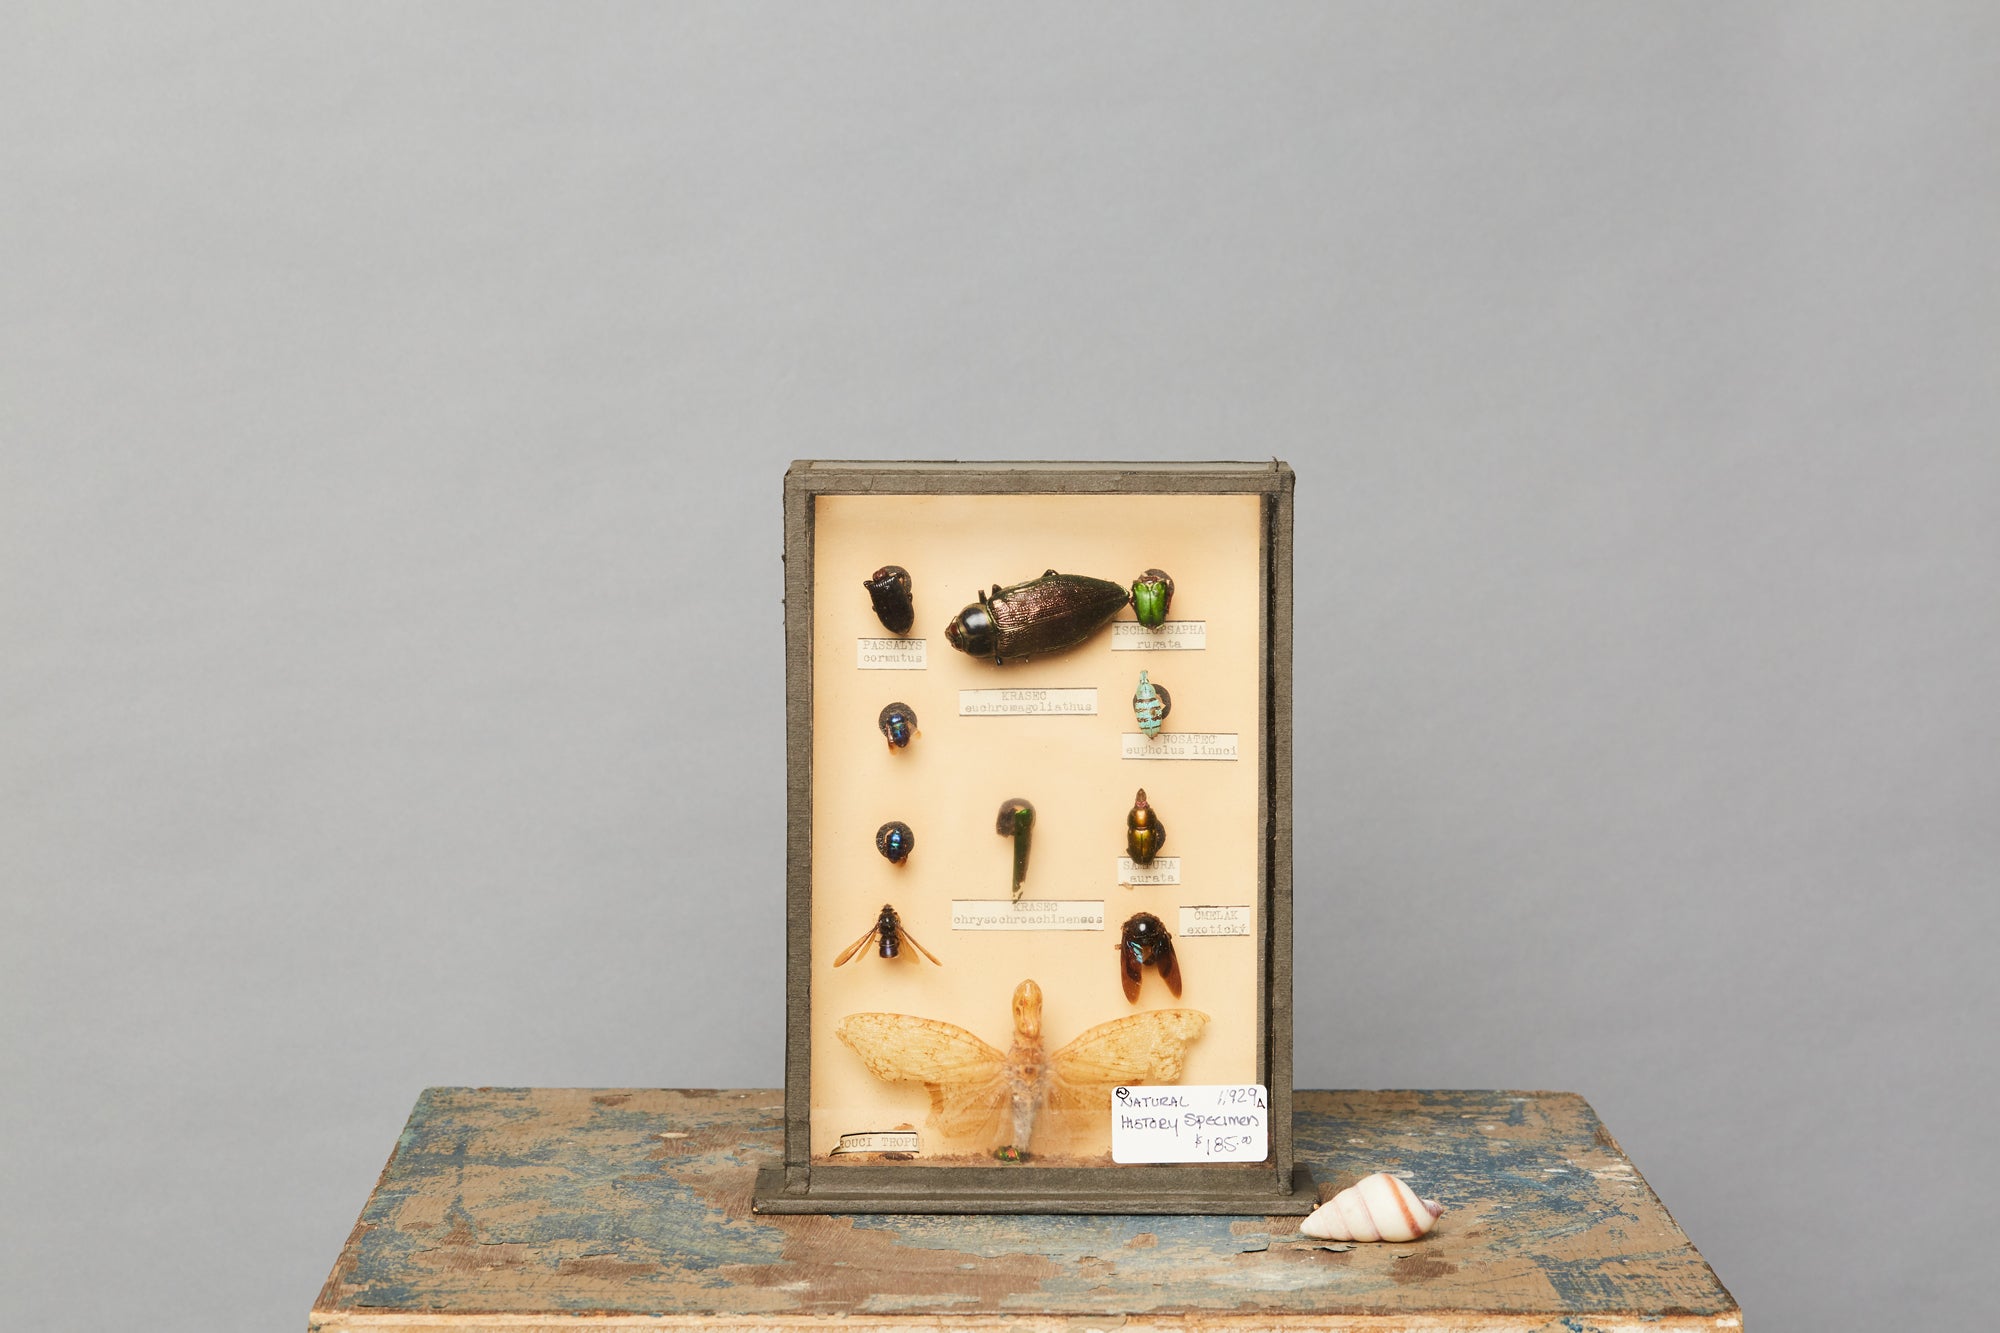 Mounted Beetle Collection from a Hungarian Natural History Museum